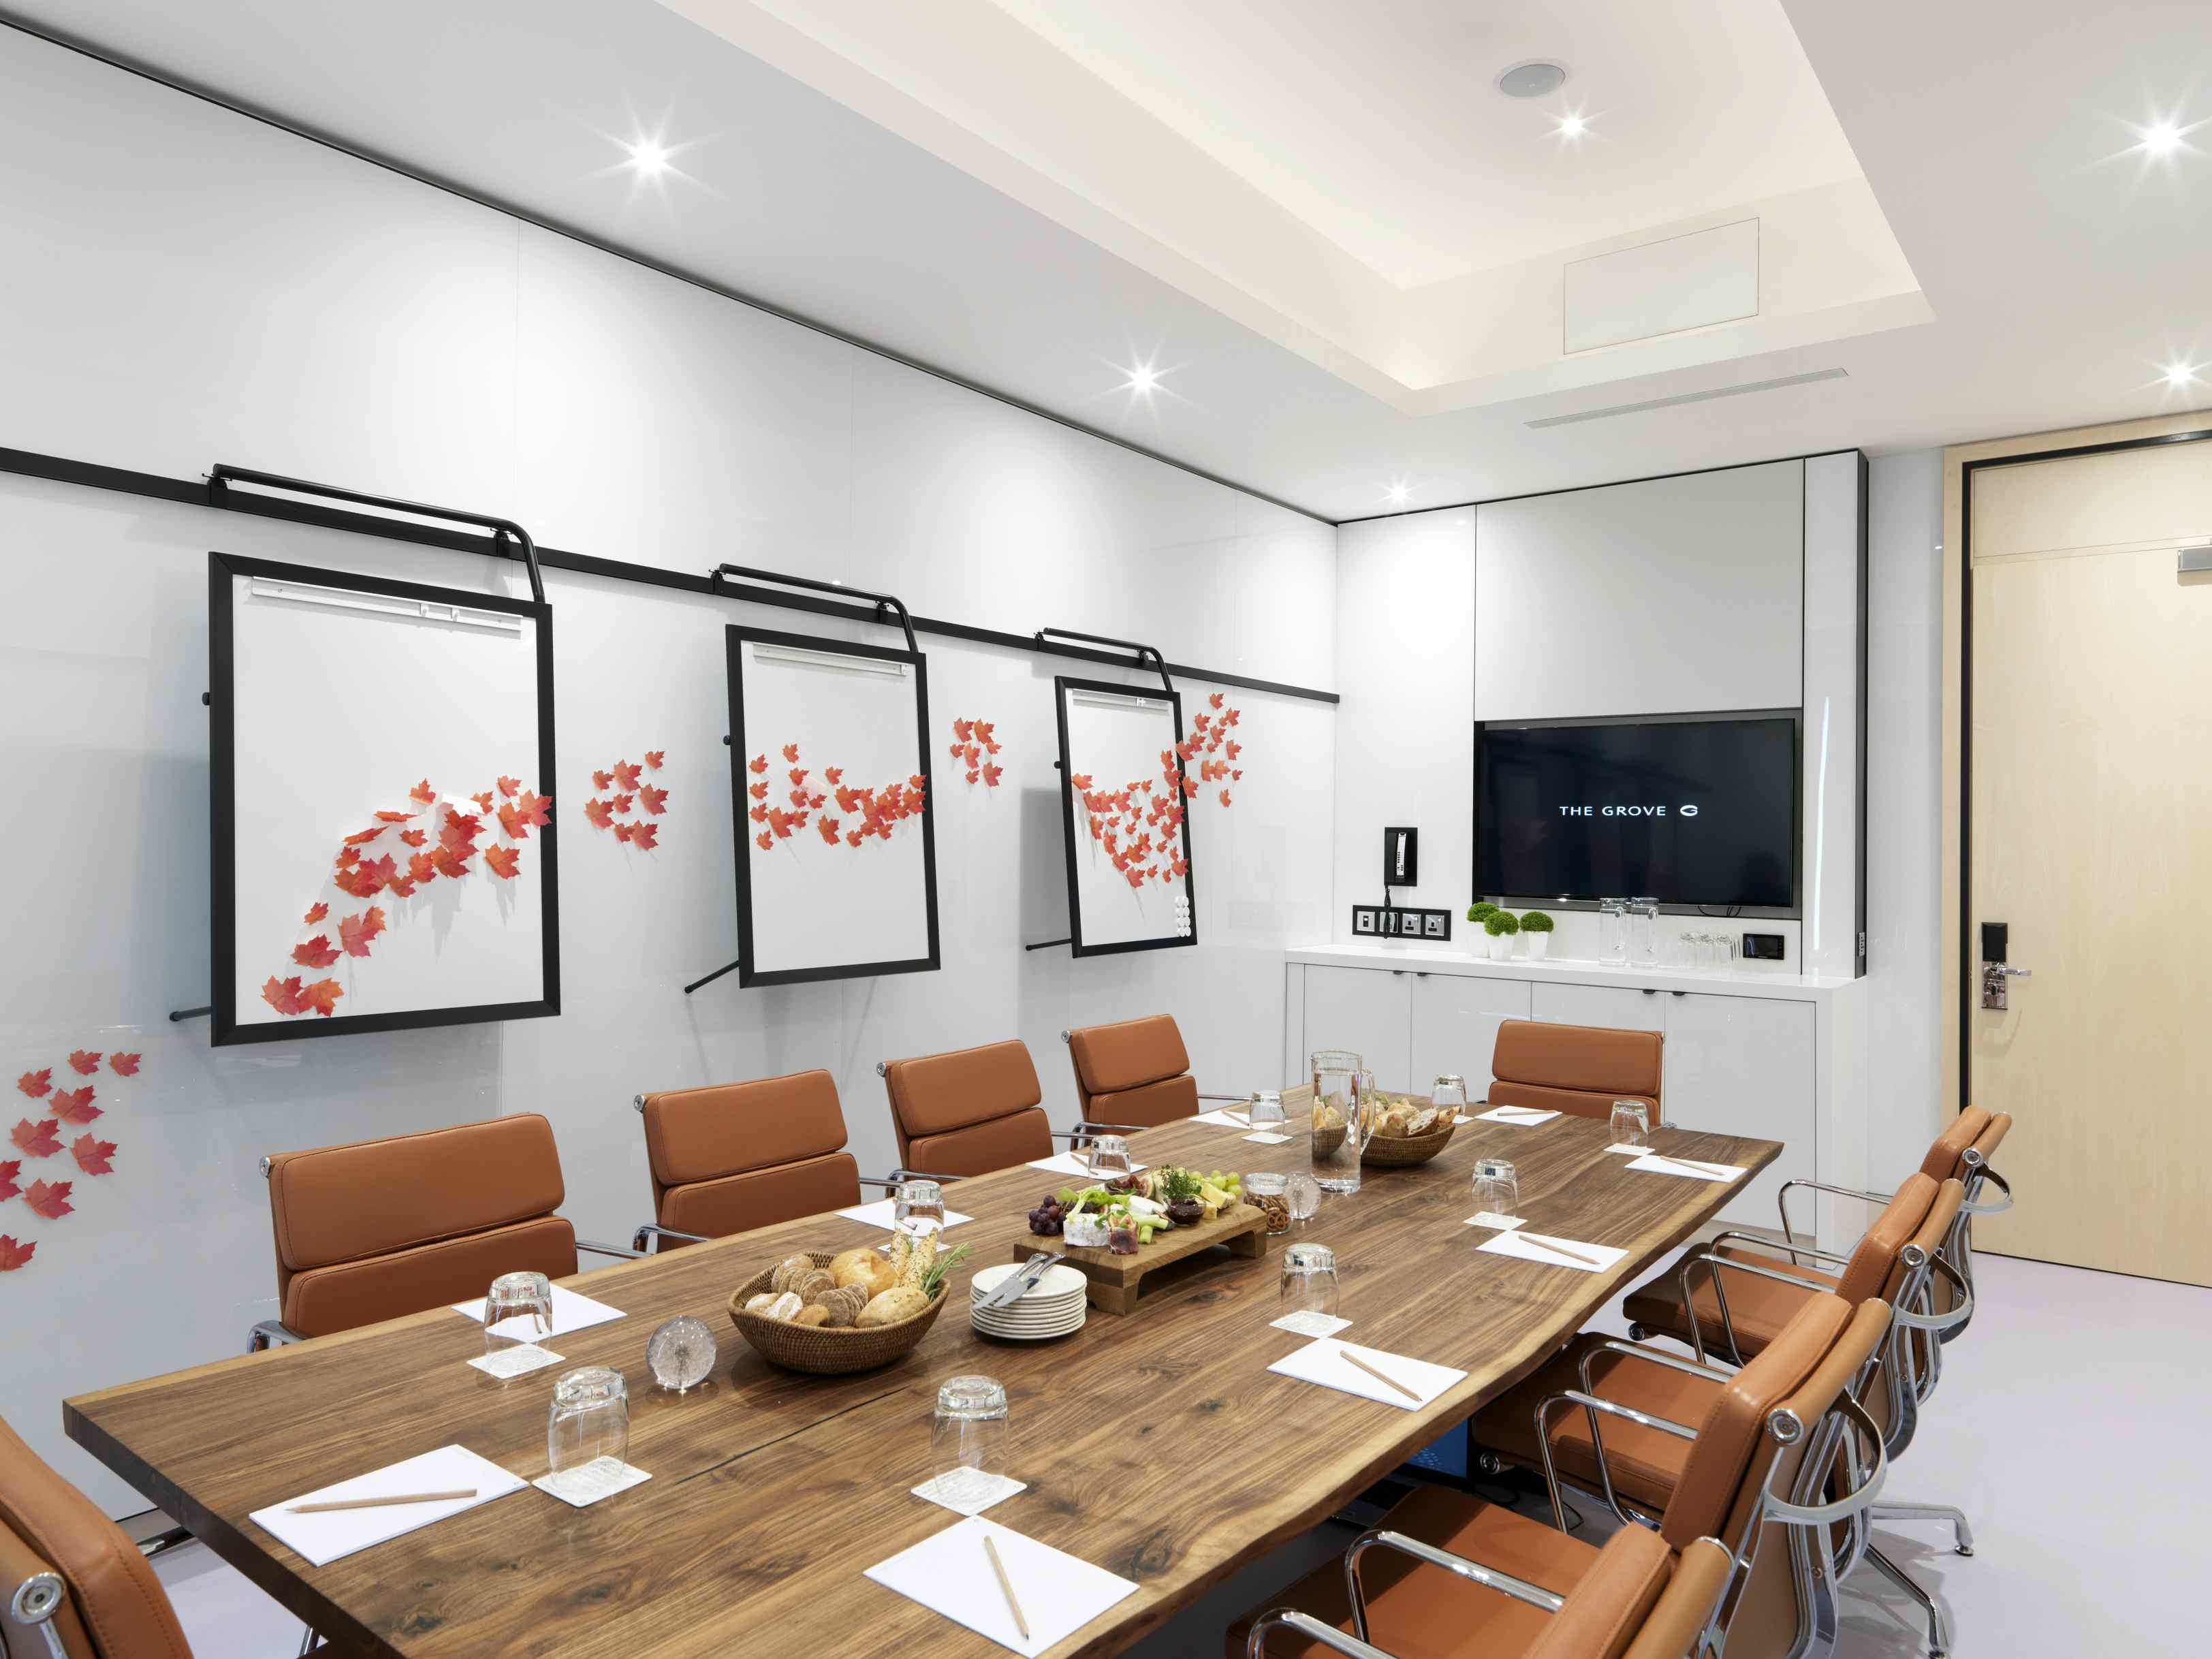 Small meeting rooms, The Grove